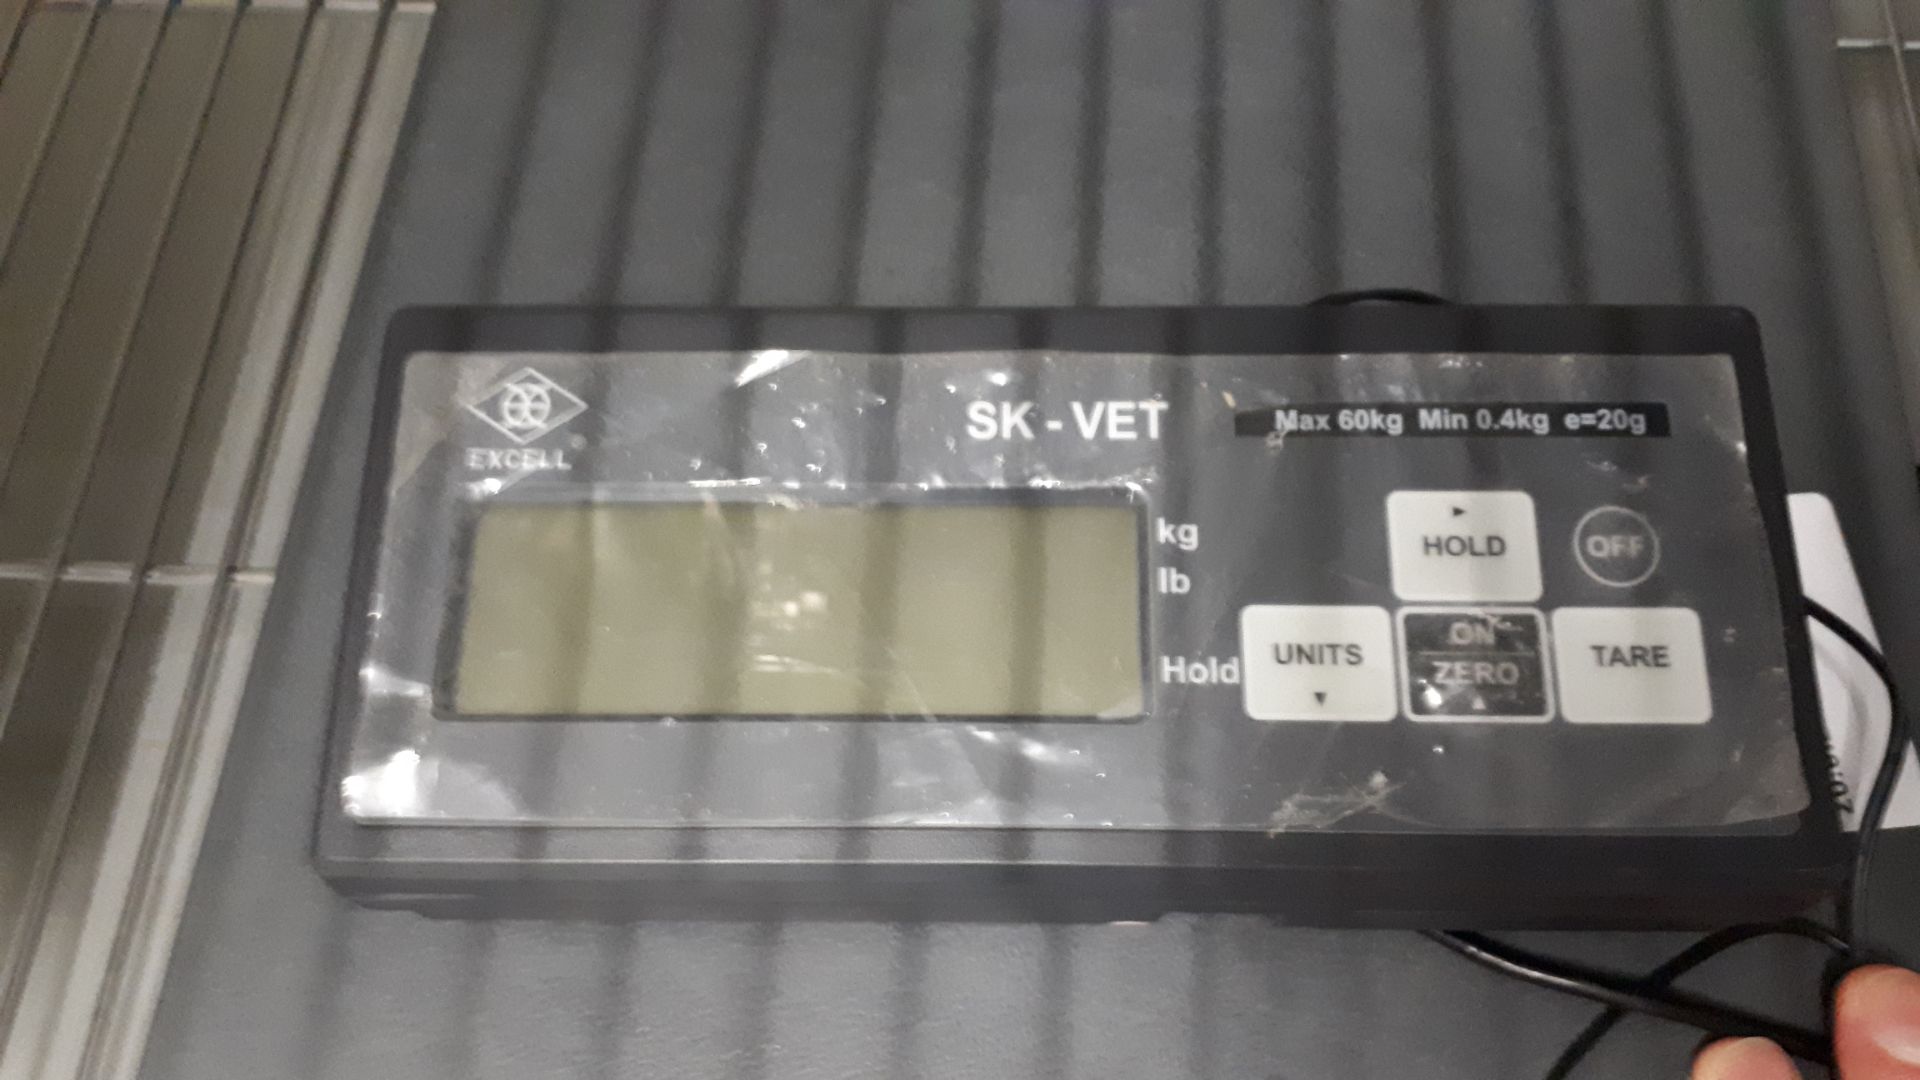 Excell SK-VET Digital Scales - Image 2 of 3